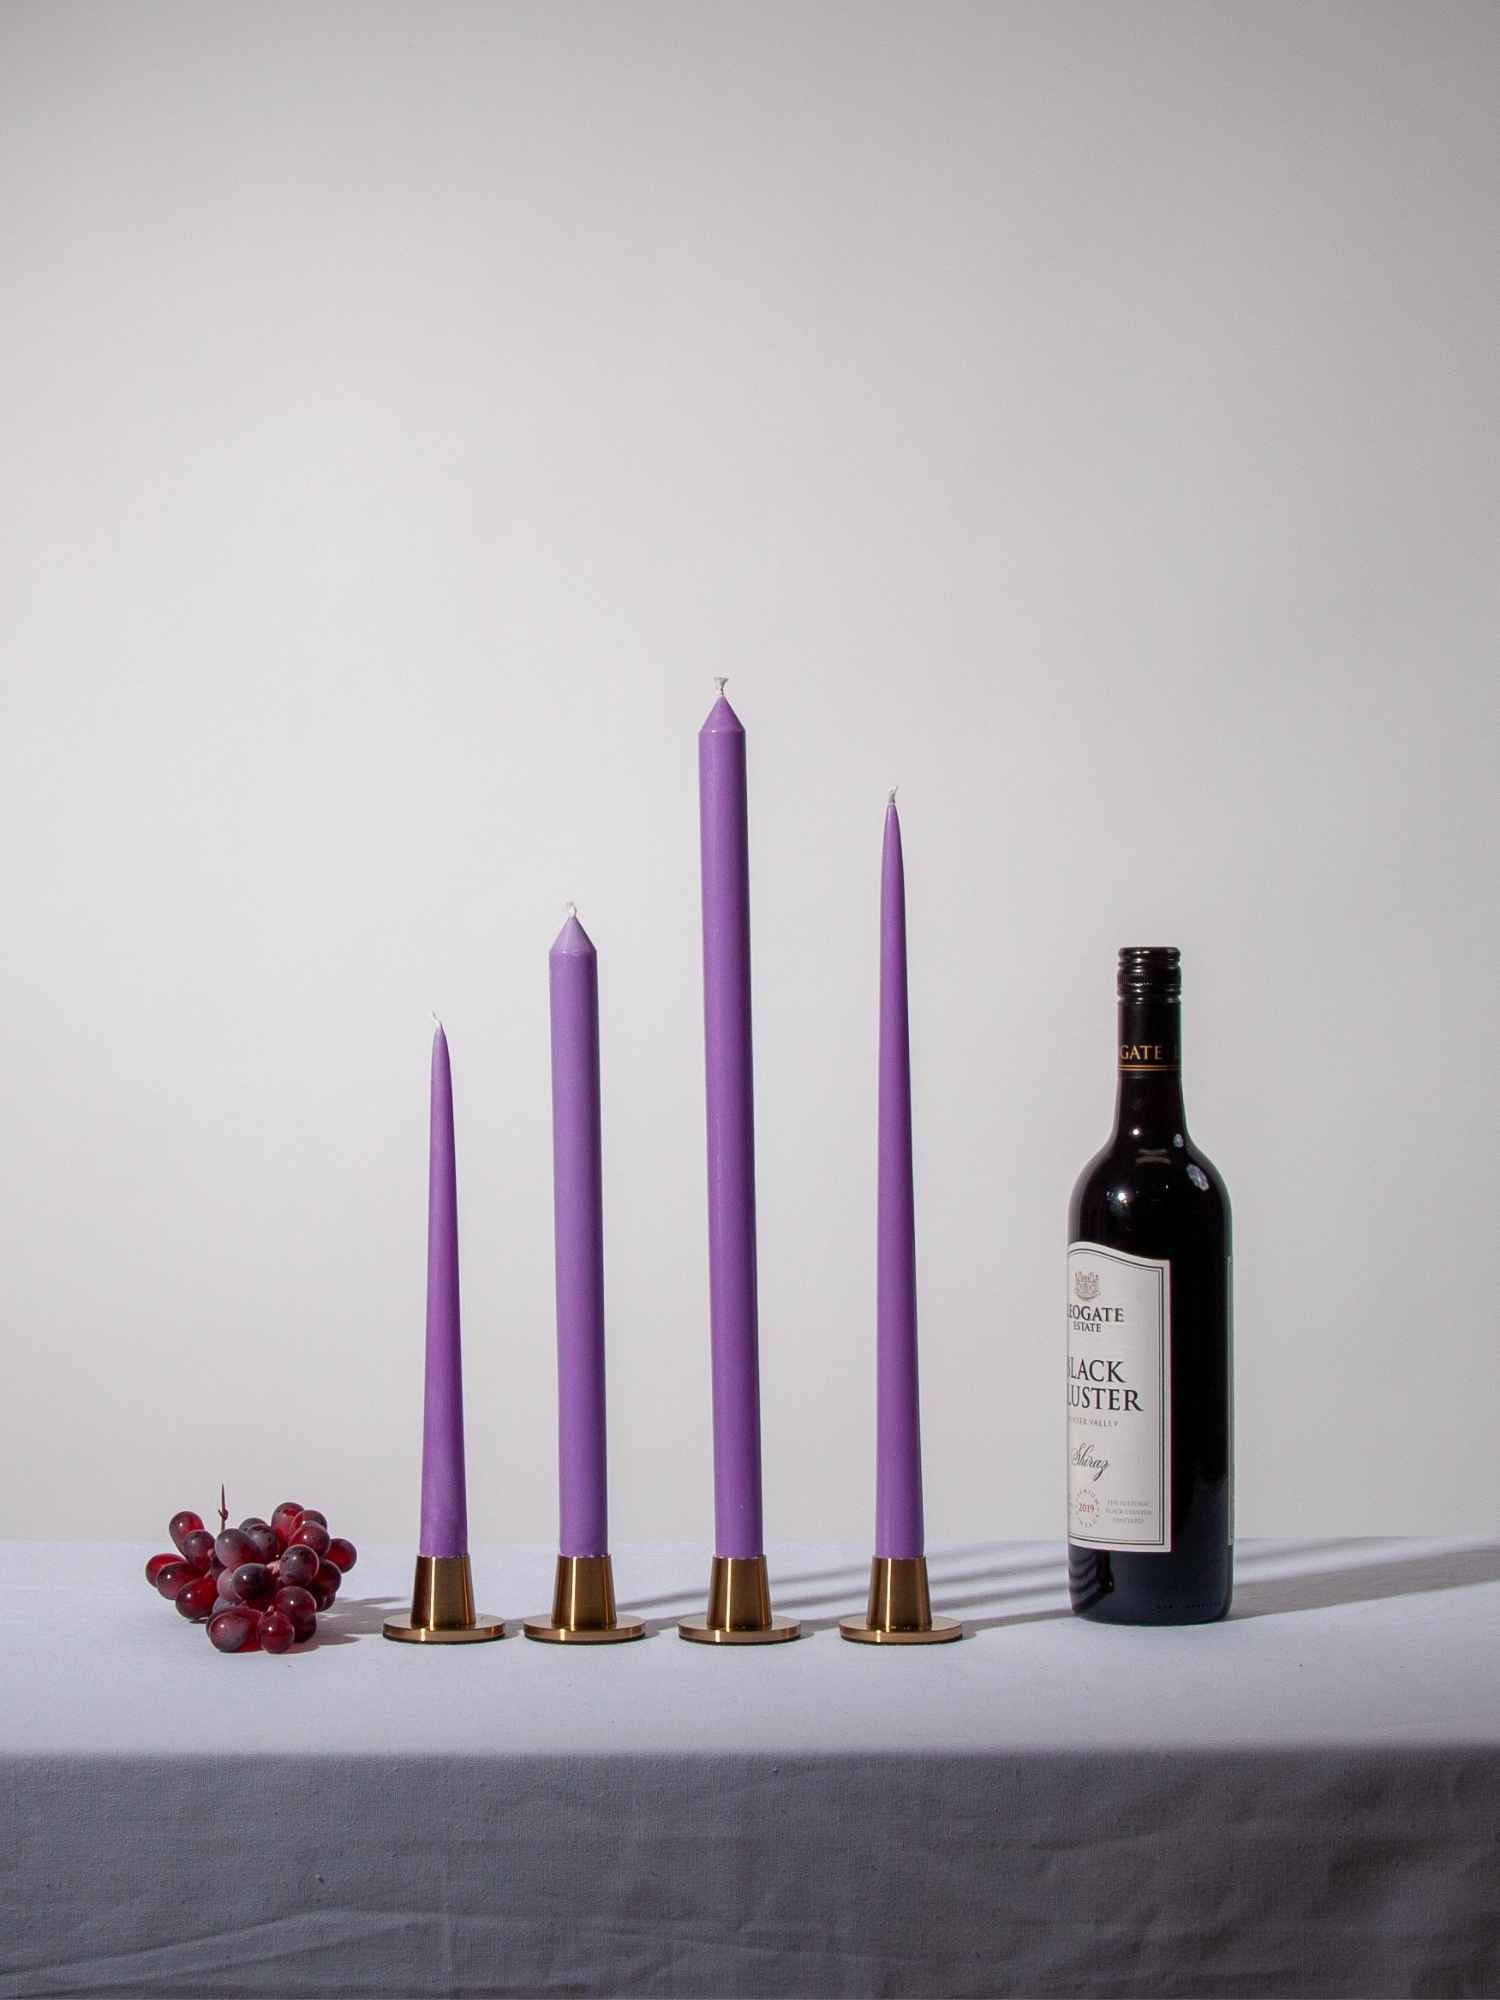 Purple 30cm Dinner Candle, Pack of 4